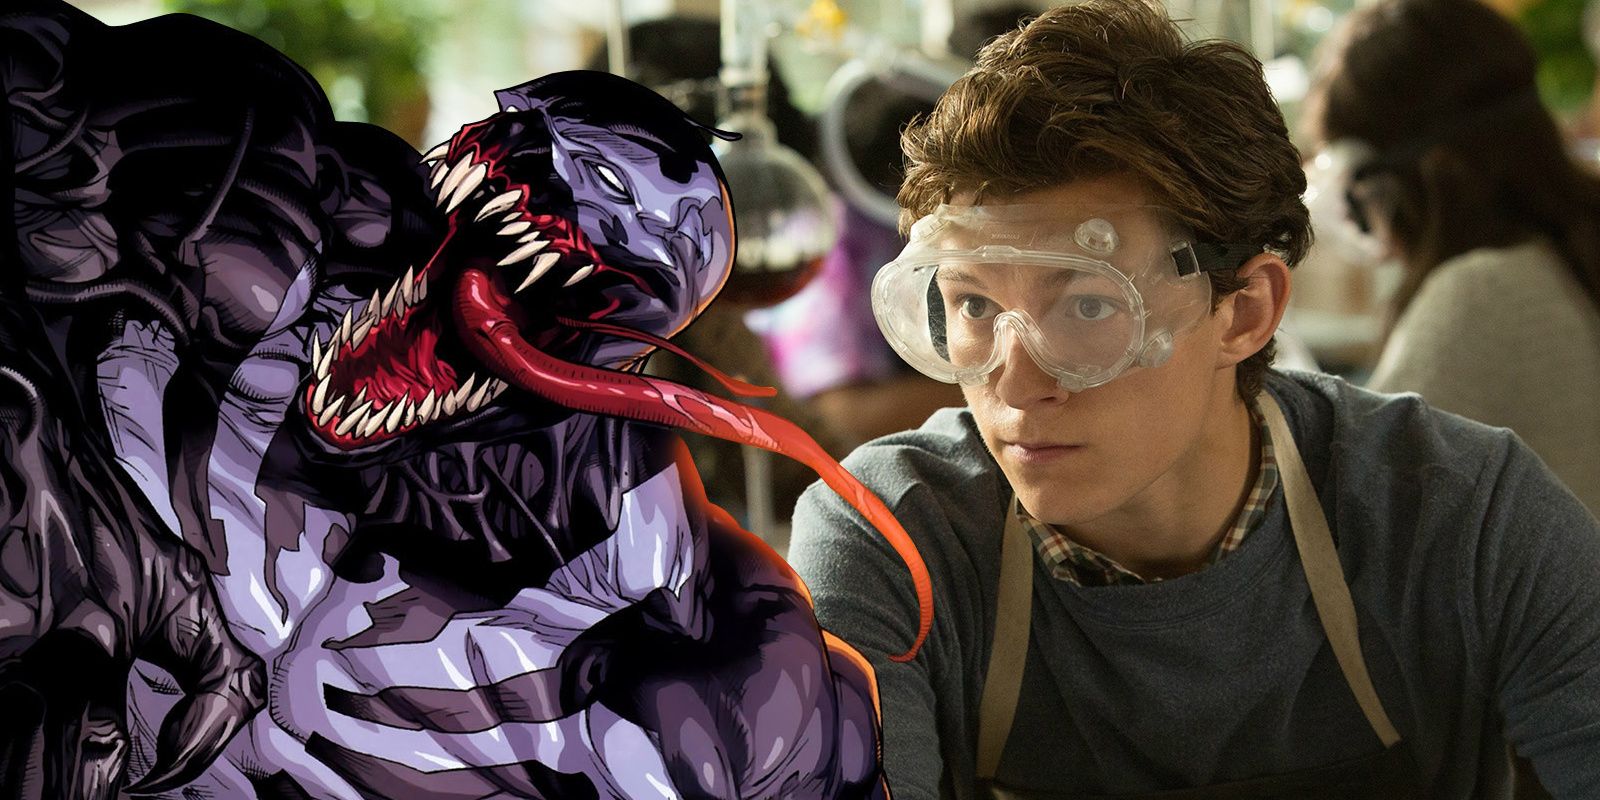 Venom Rumored to Include Tom Holland’s Peter Parker Not SpiderMan